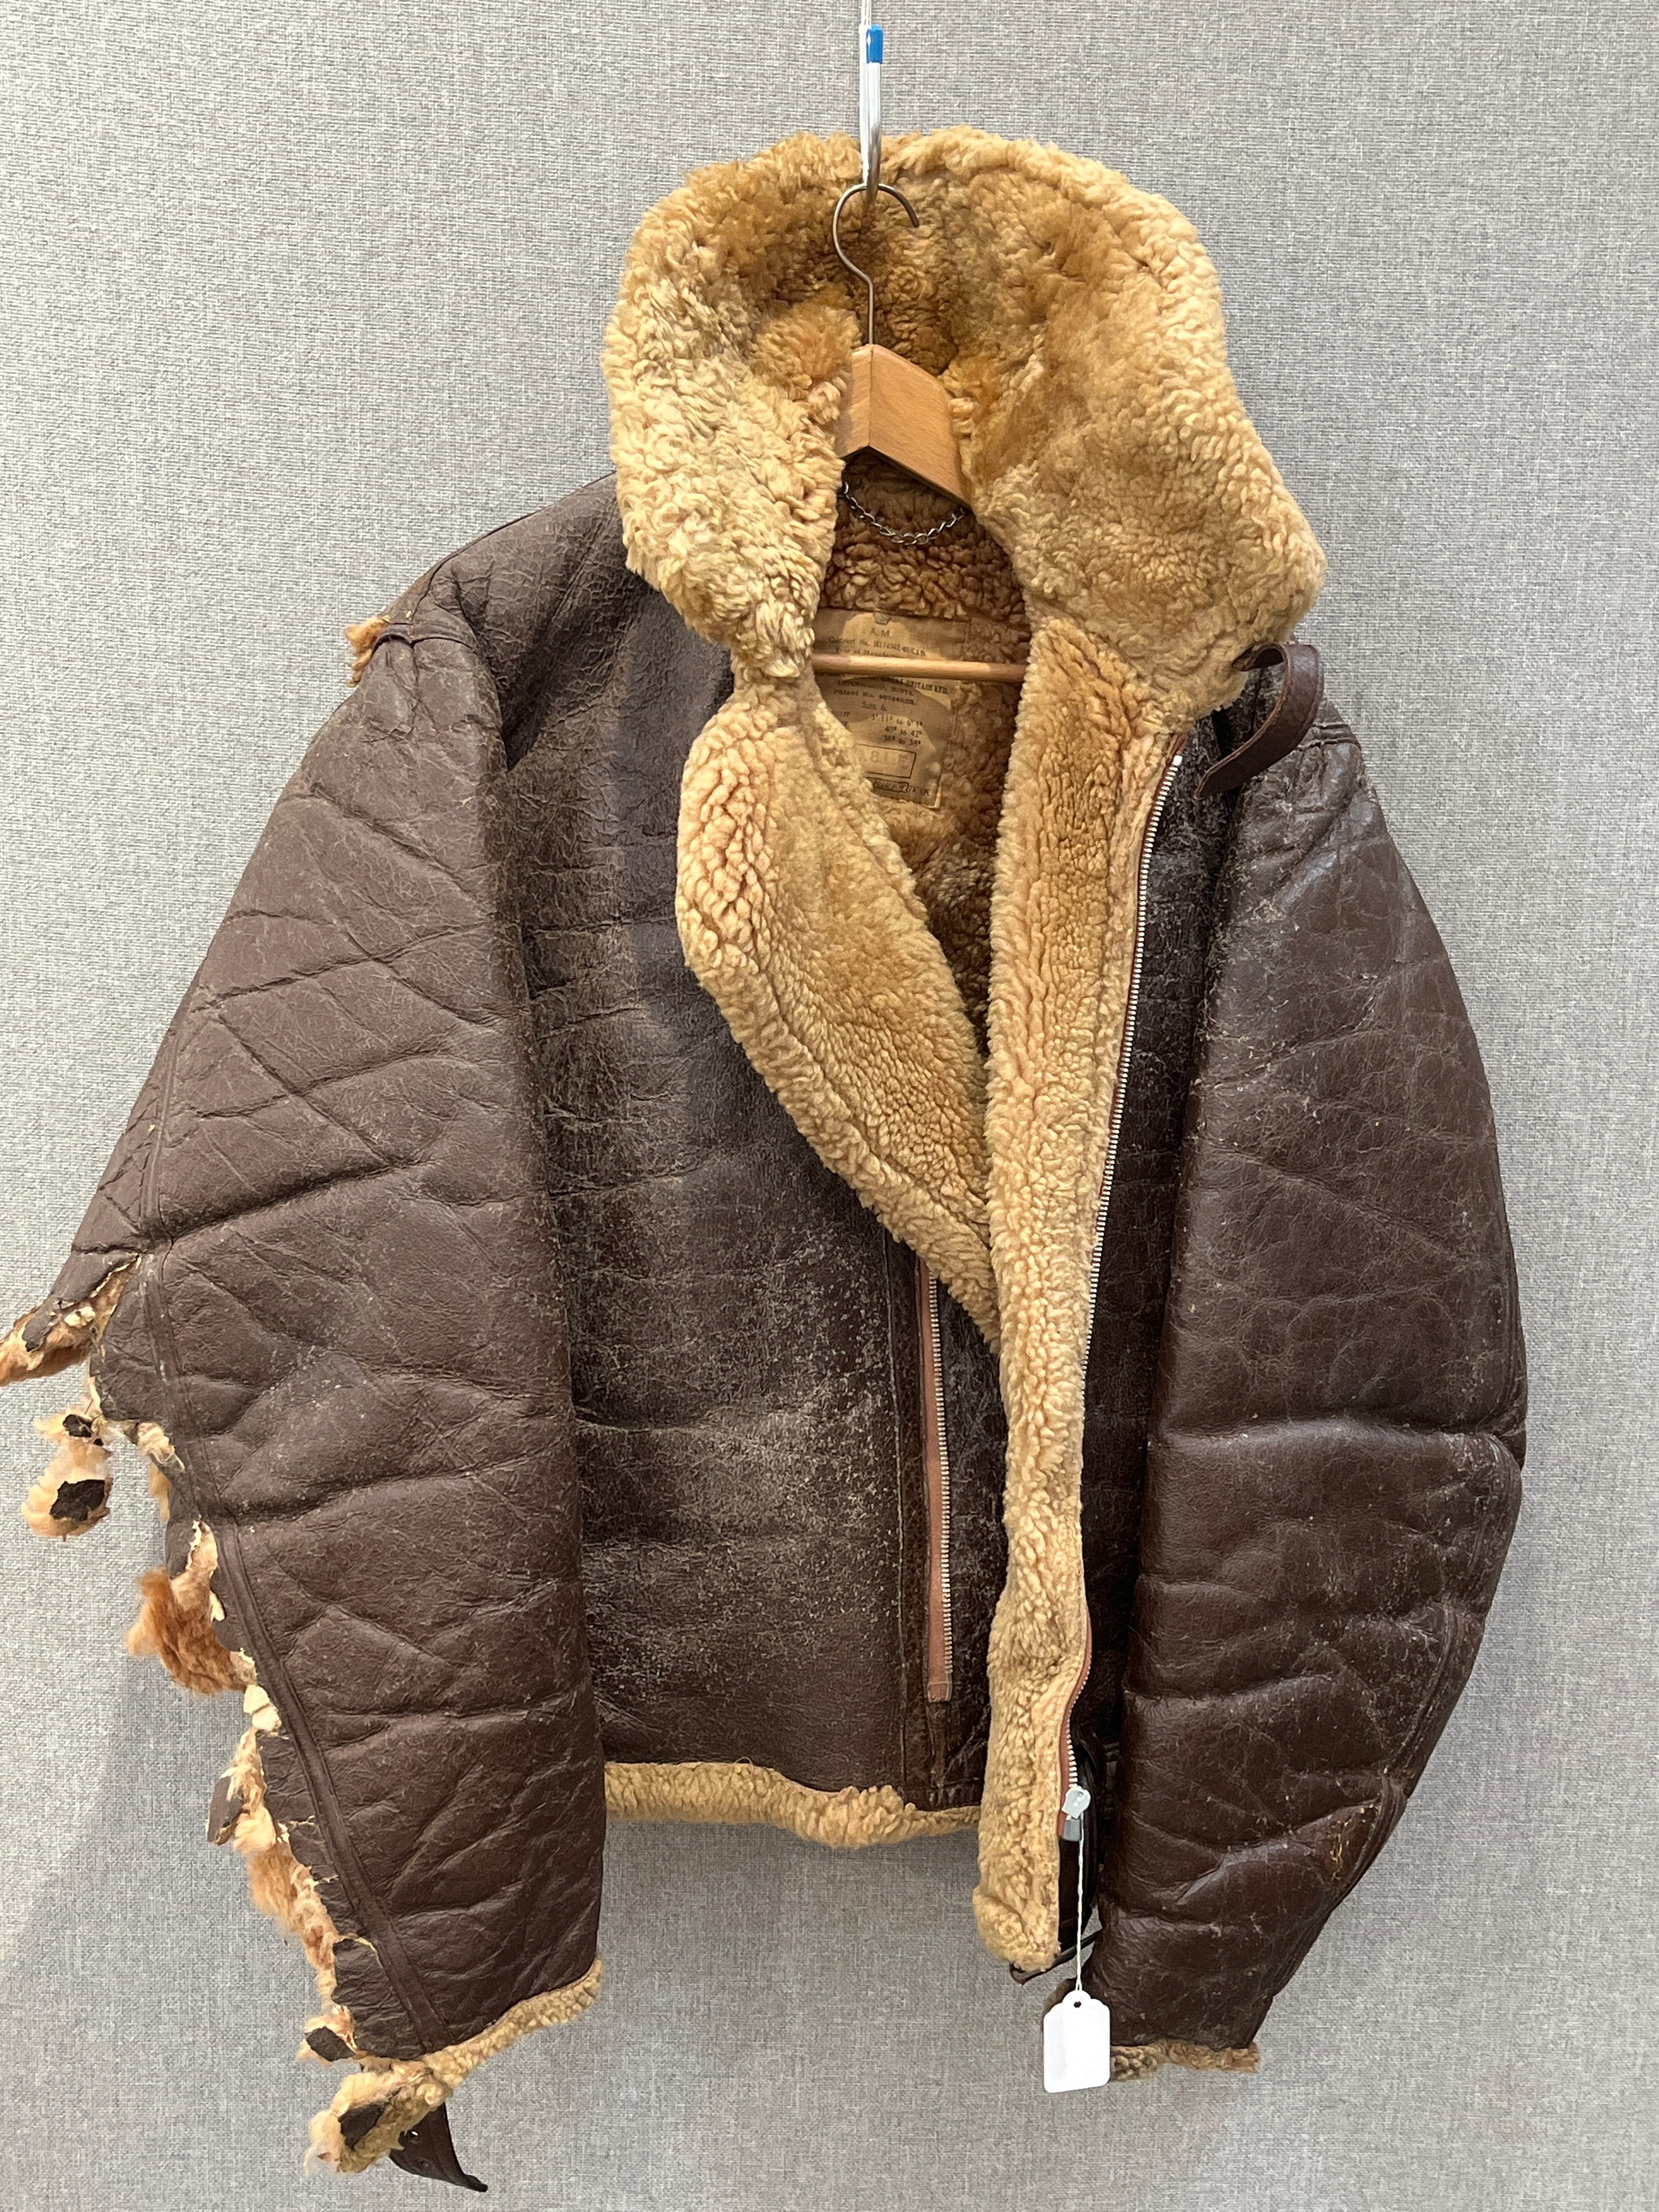 A WWII British Irvin flying jacket dated 1941, relic condition a/f with provenance relating to Roger